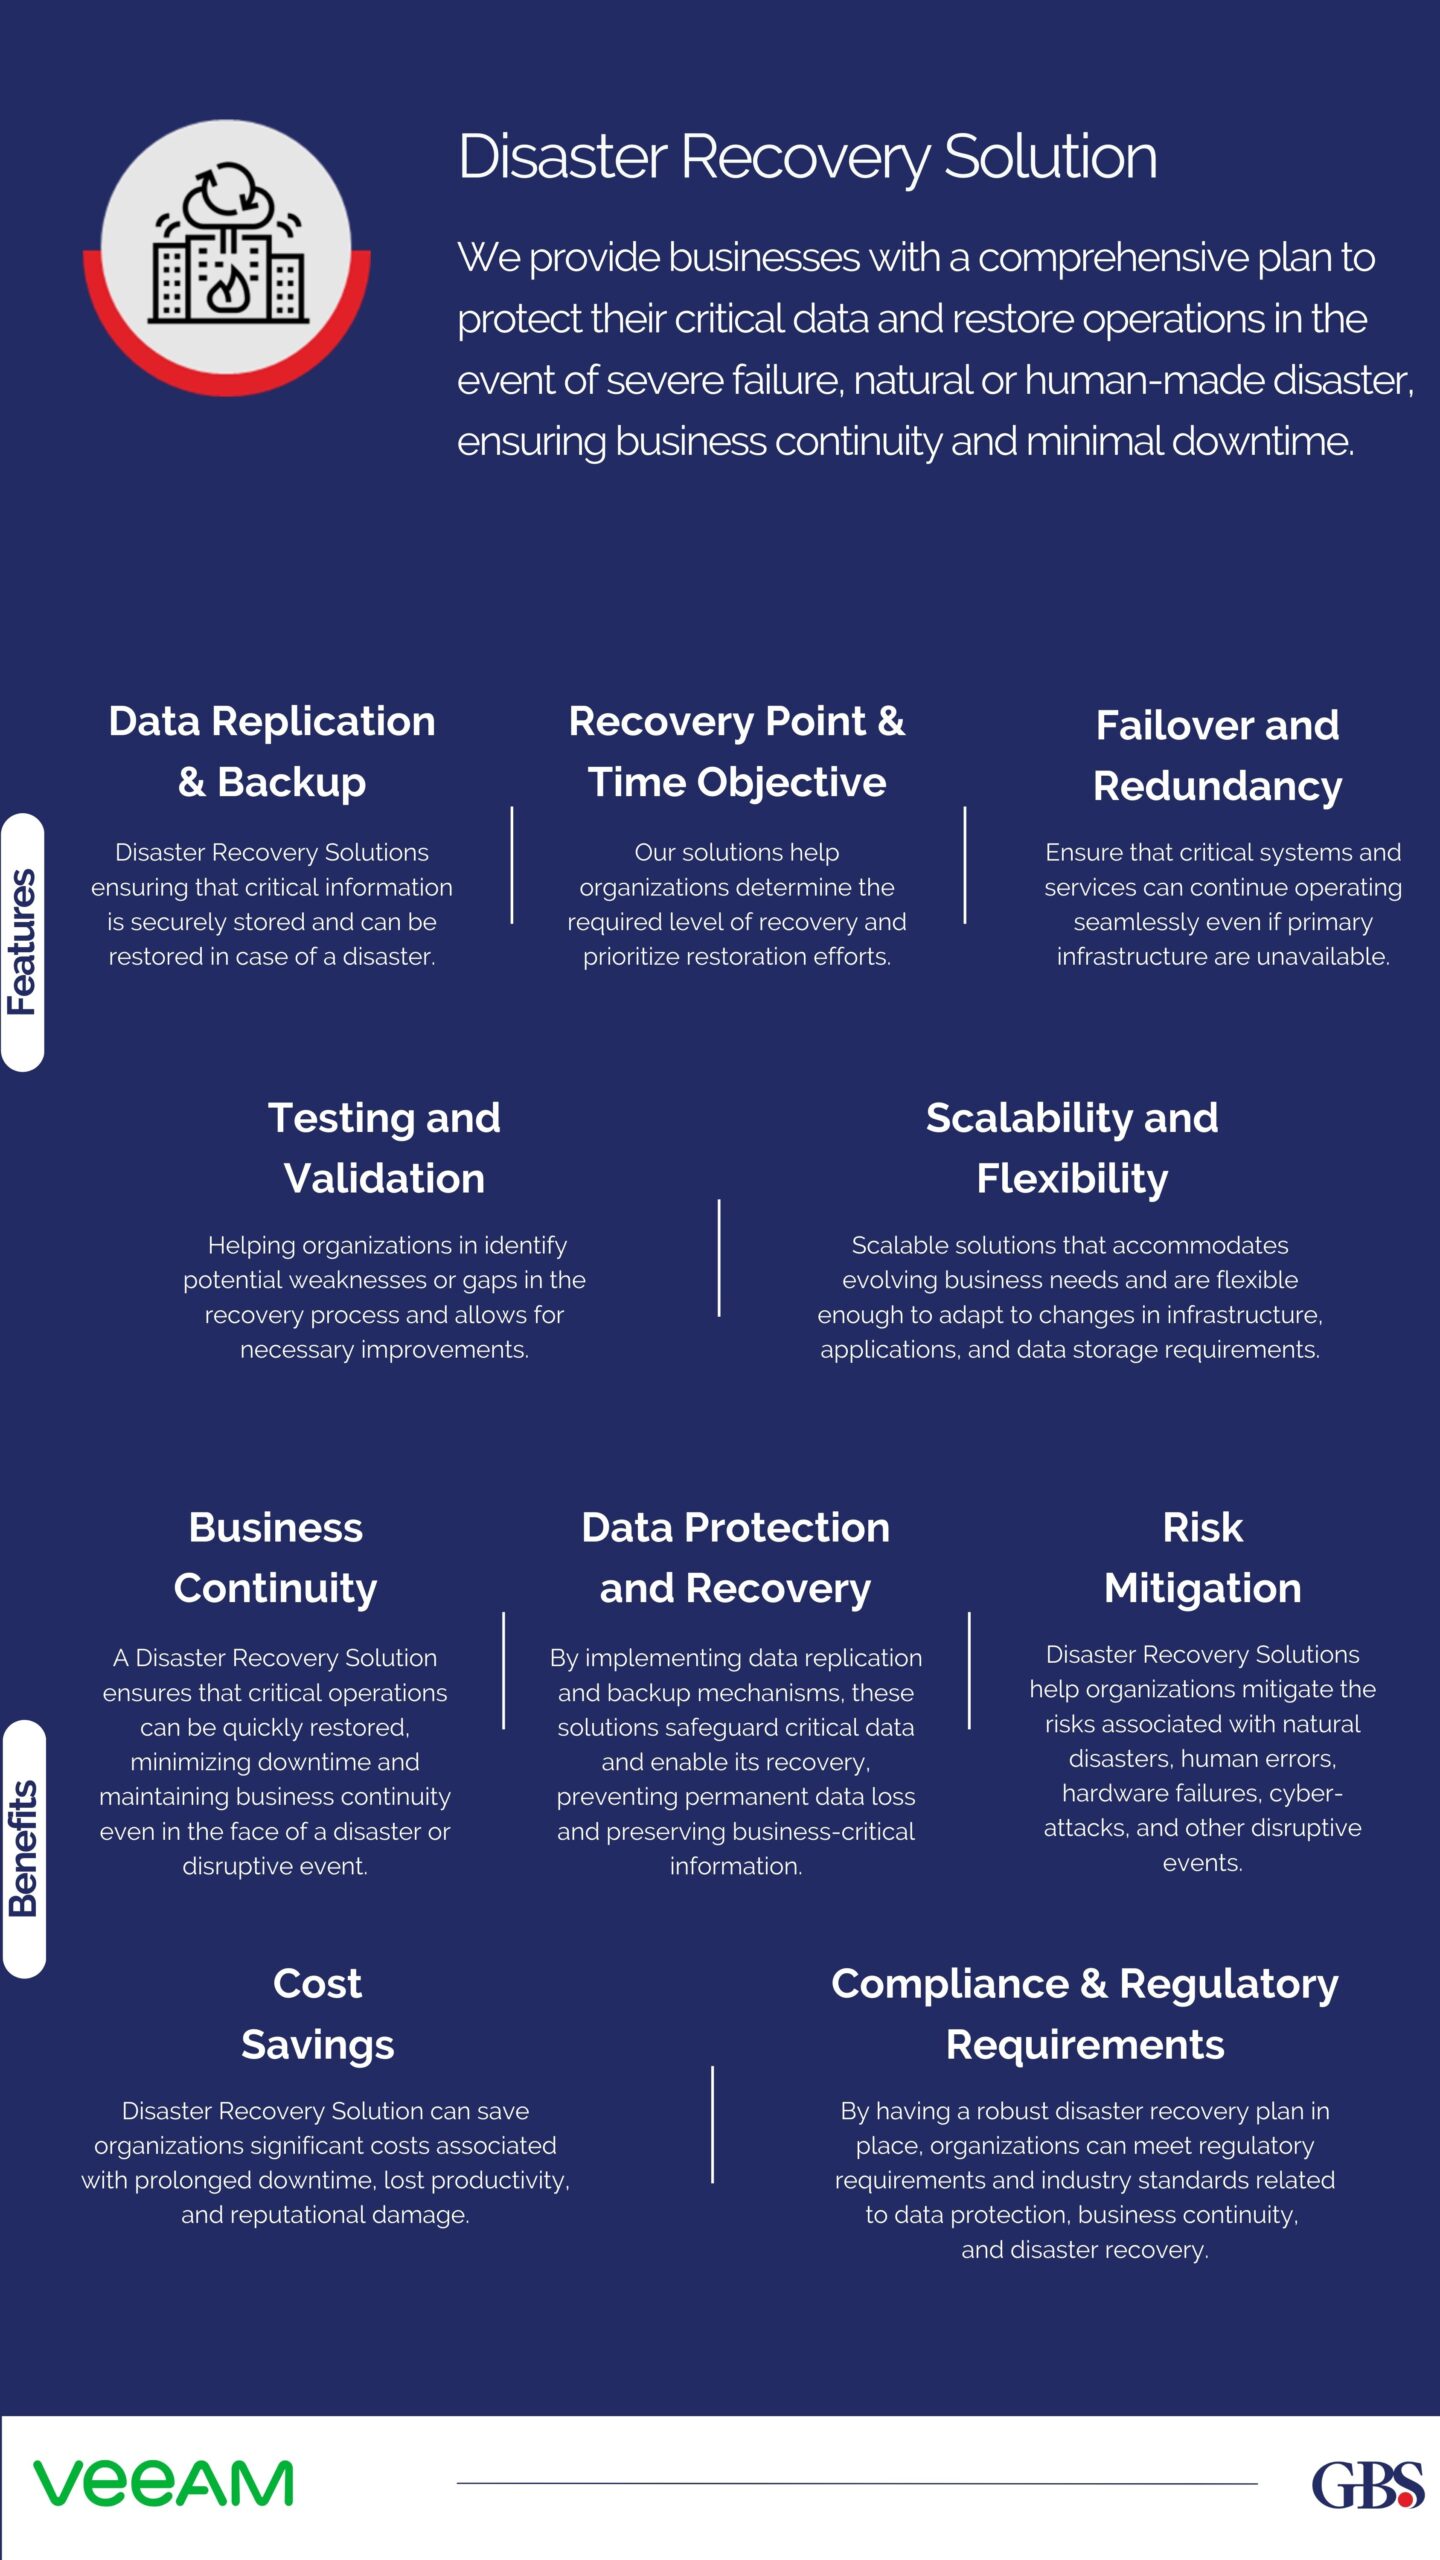 Pop-up Disaster Recovery Solution Solutions by Global Business Solutions Dubai